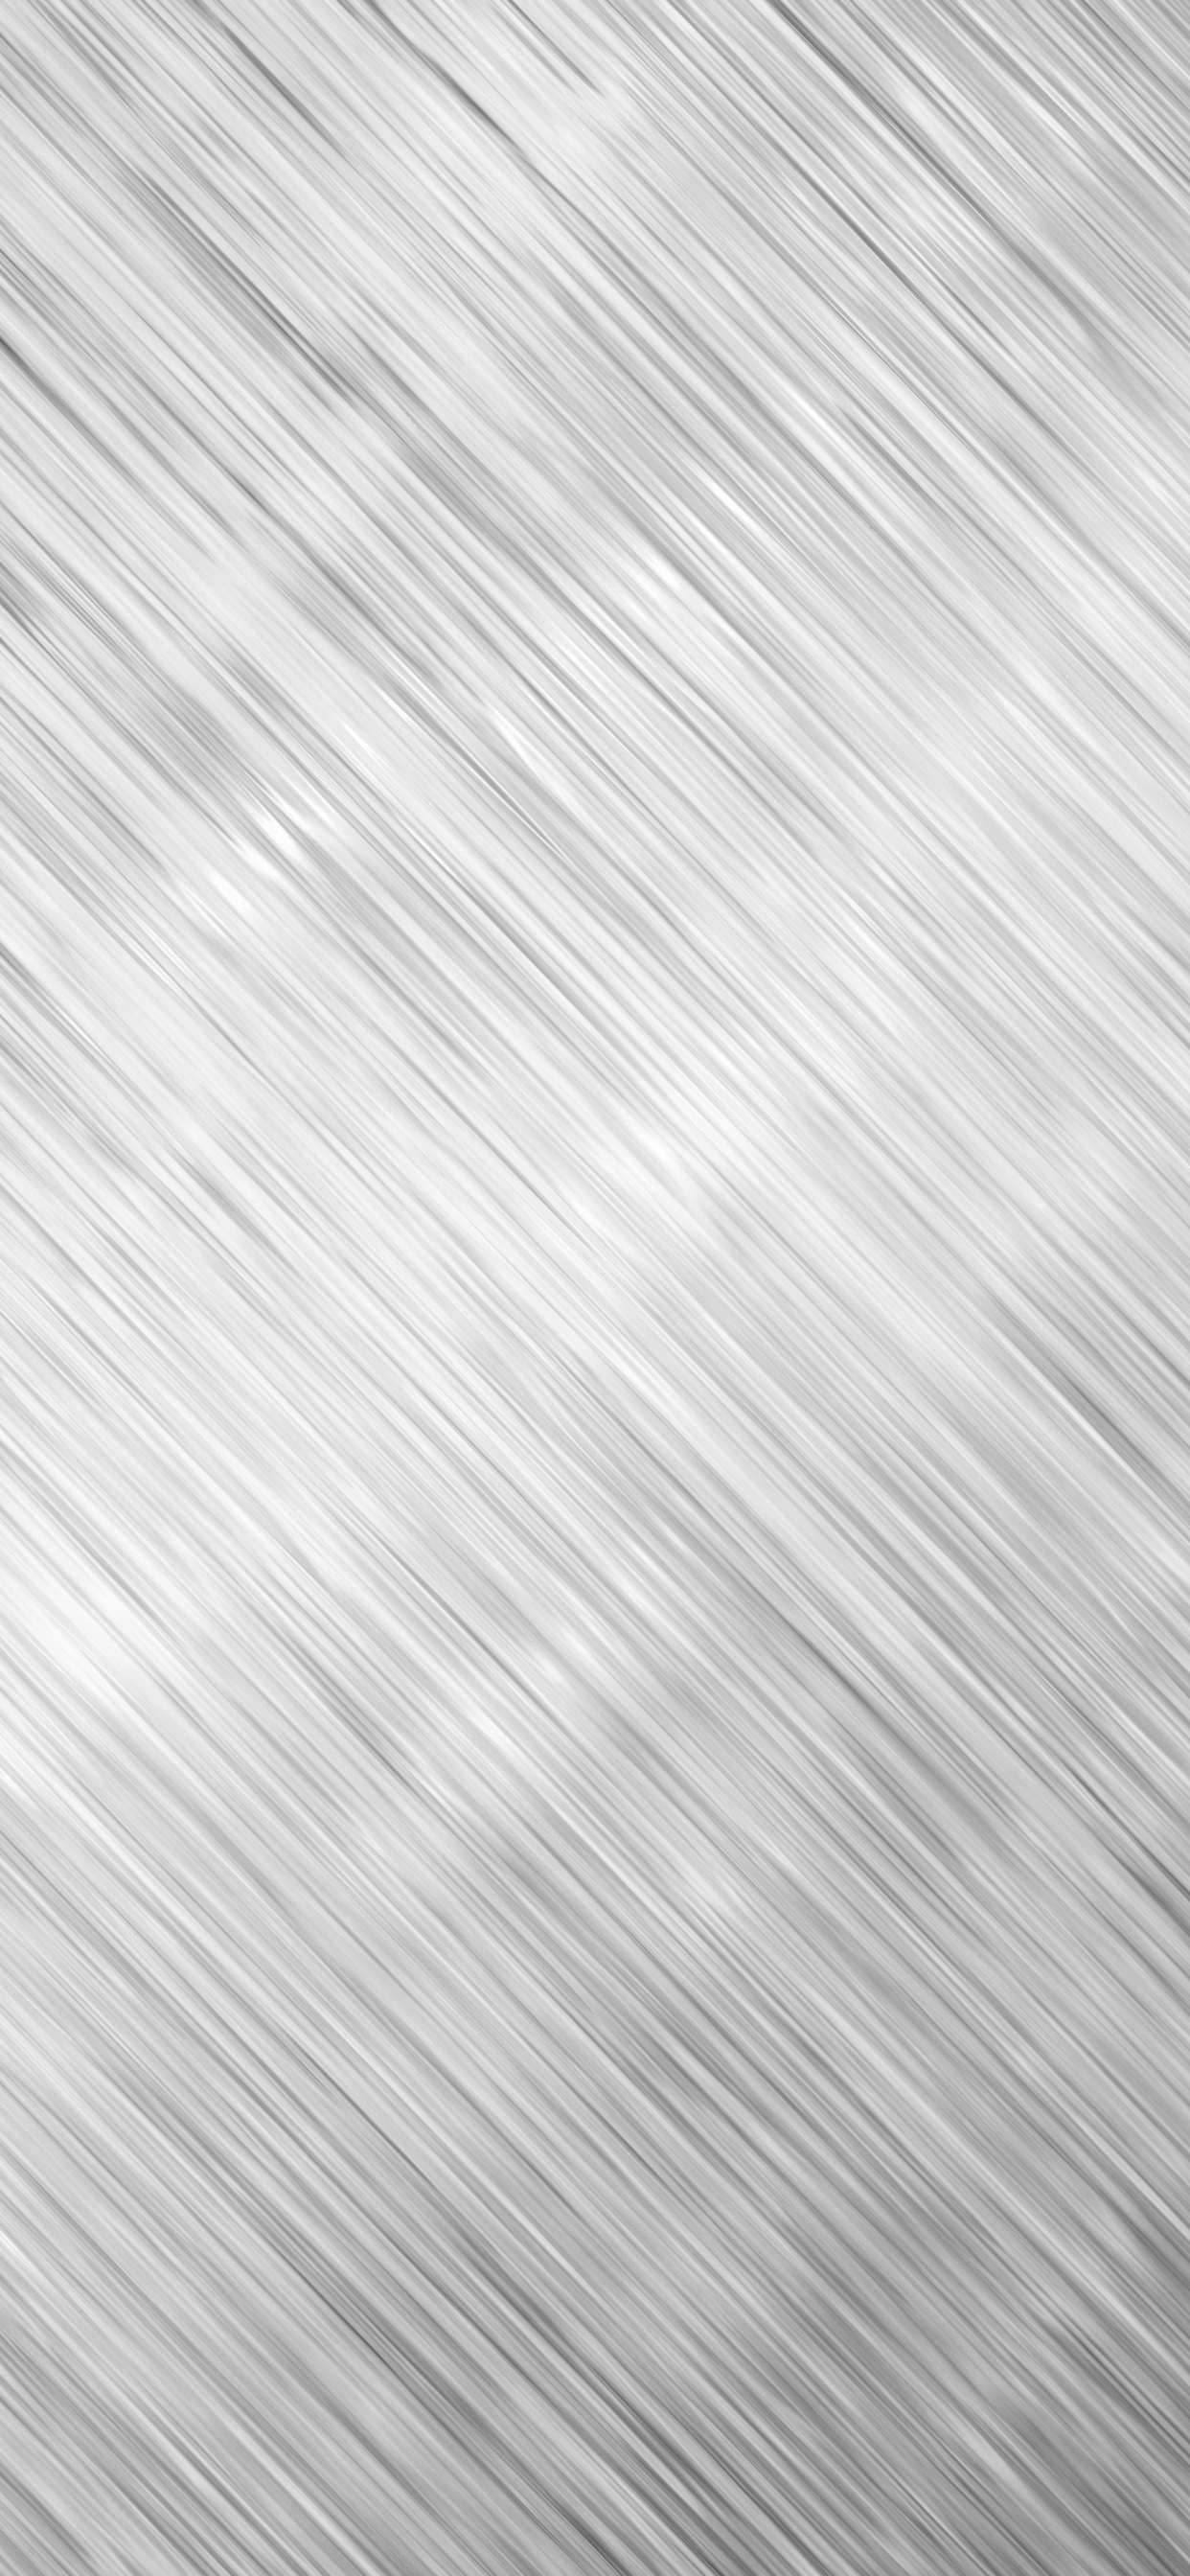 Grey and White Striped Textile. Wallpaper in 1242x2688 Resolution